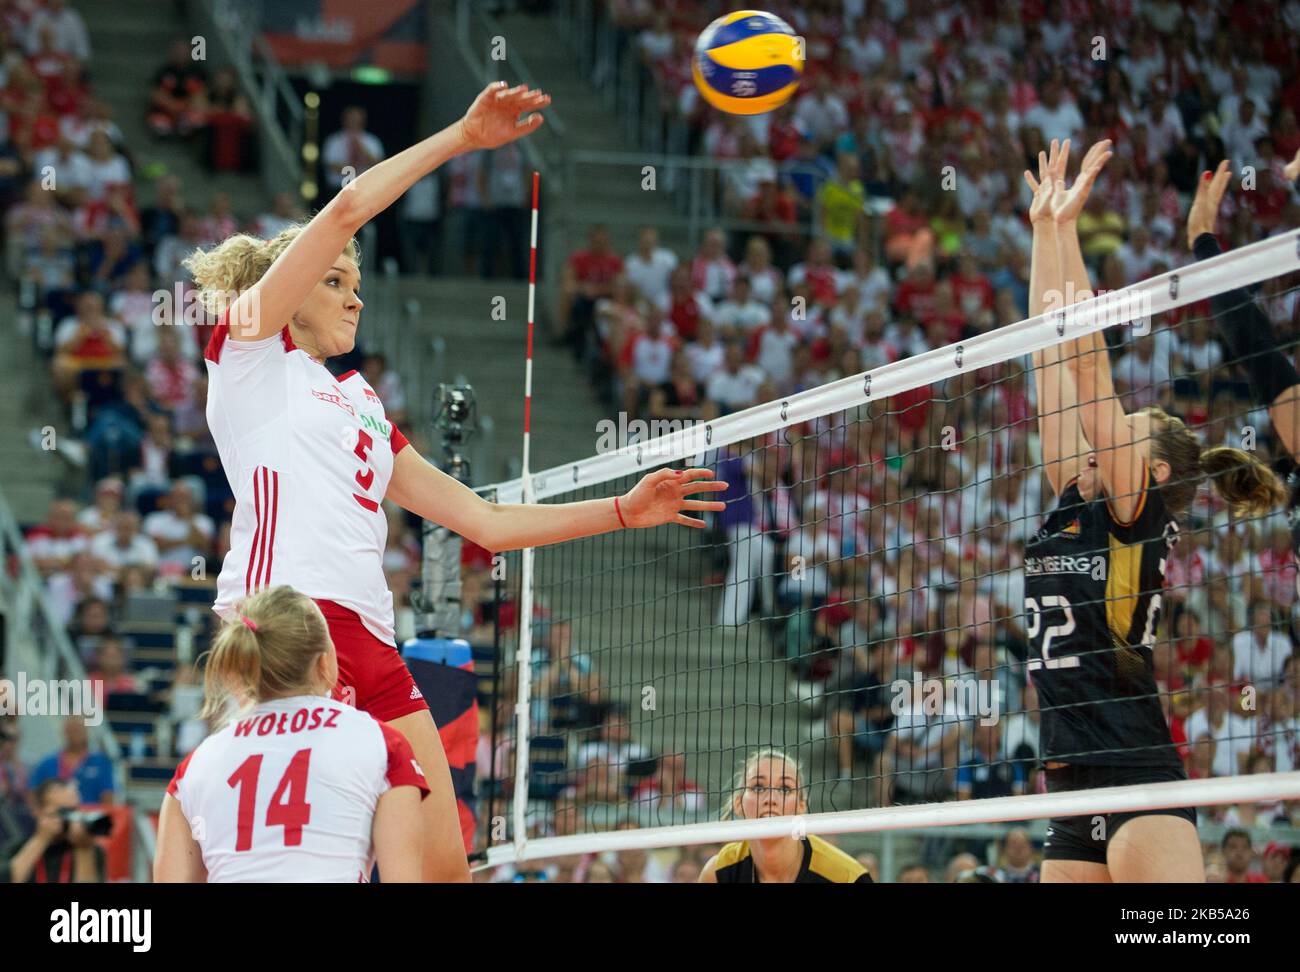 Agnieszka Kakolewska and Joanna Wolosz of Poland compete against Lisa Grundig of Germany during Volleyball European Championship Women, Quarter Final match between Poland and Germany on 4 September 2019 in Lodz, Poland. (Photo by Foto Olimpik/NurPhoto) Stock Photo